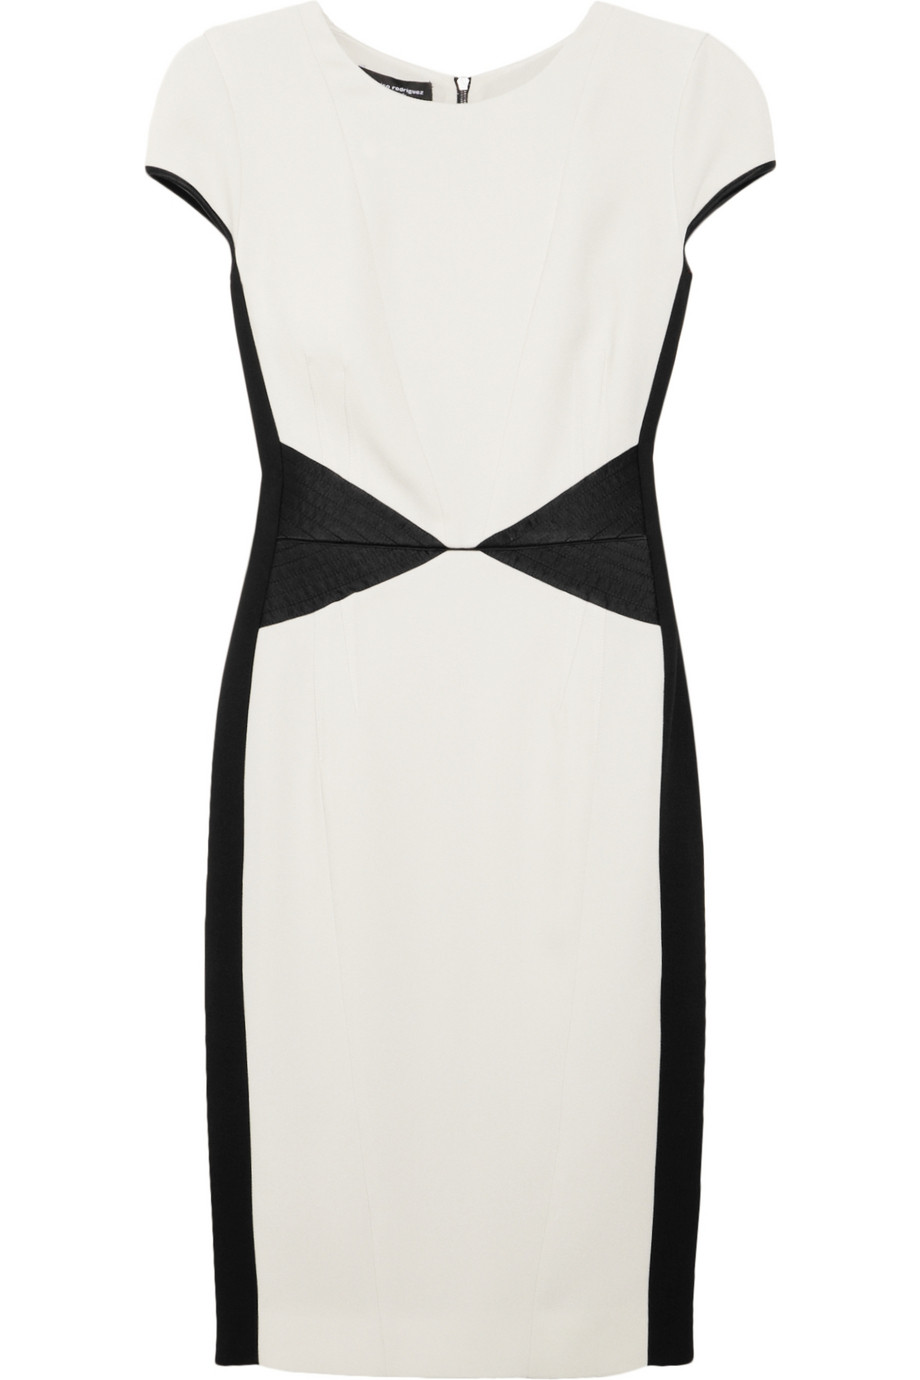 Lyst - Narciso rodriguez Paneled Silksatin and Crepe Dress in White